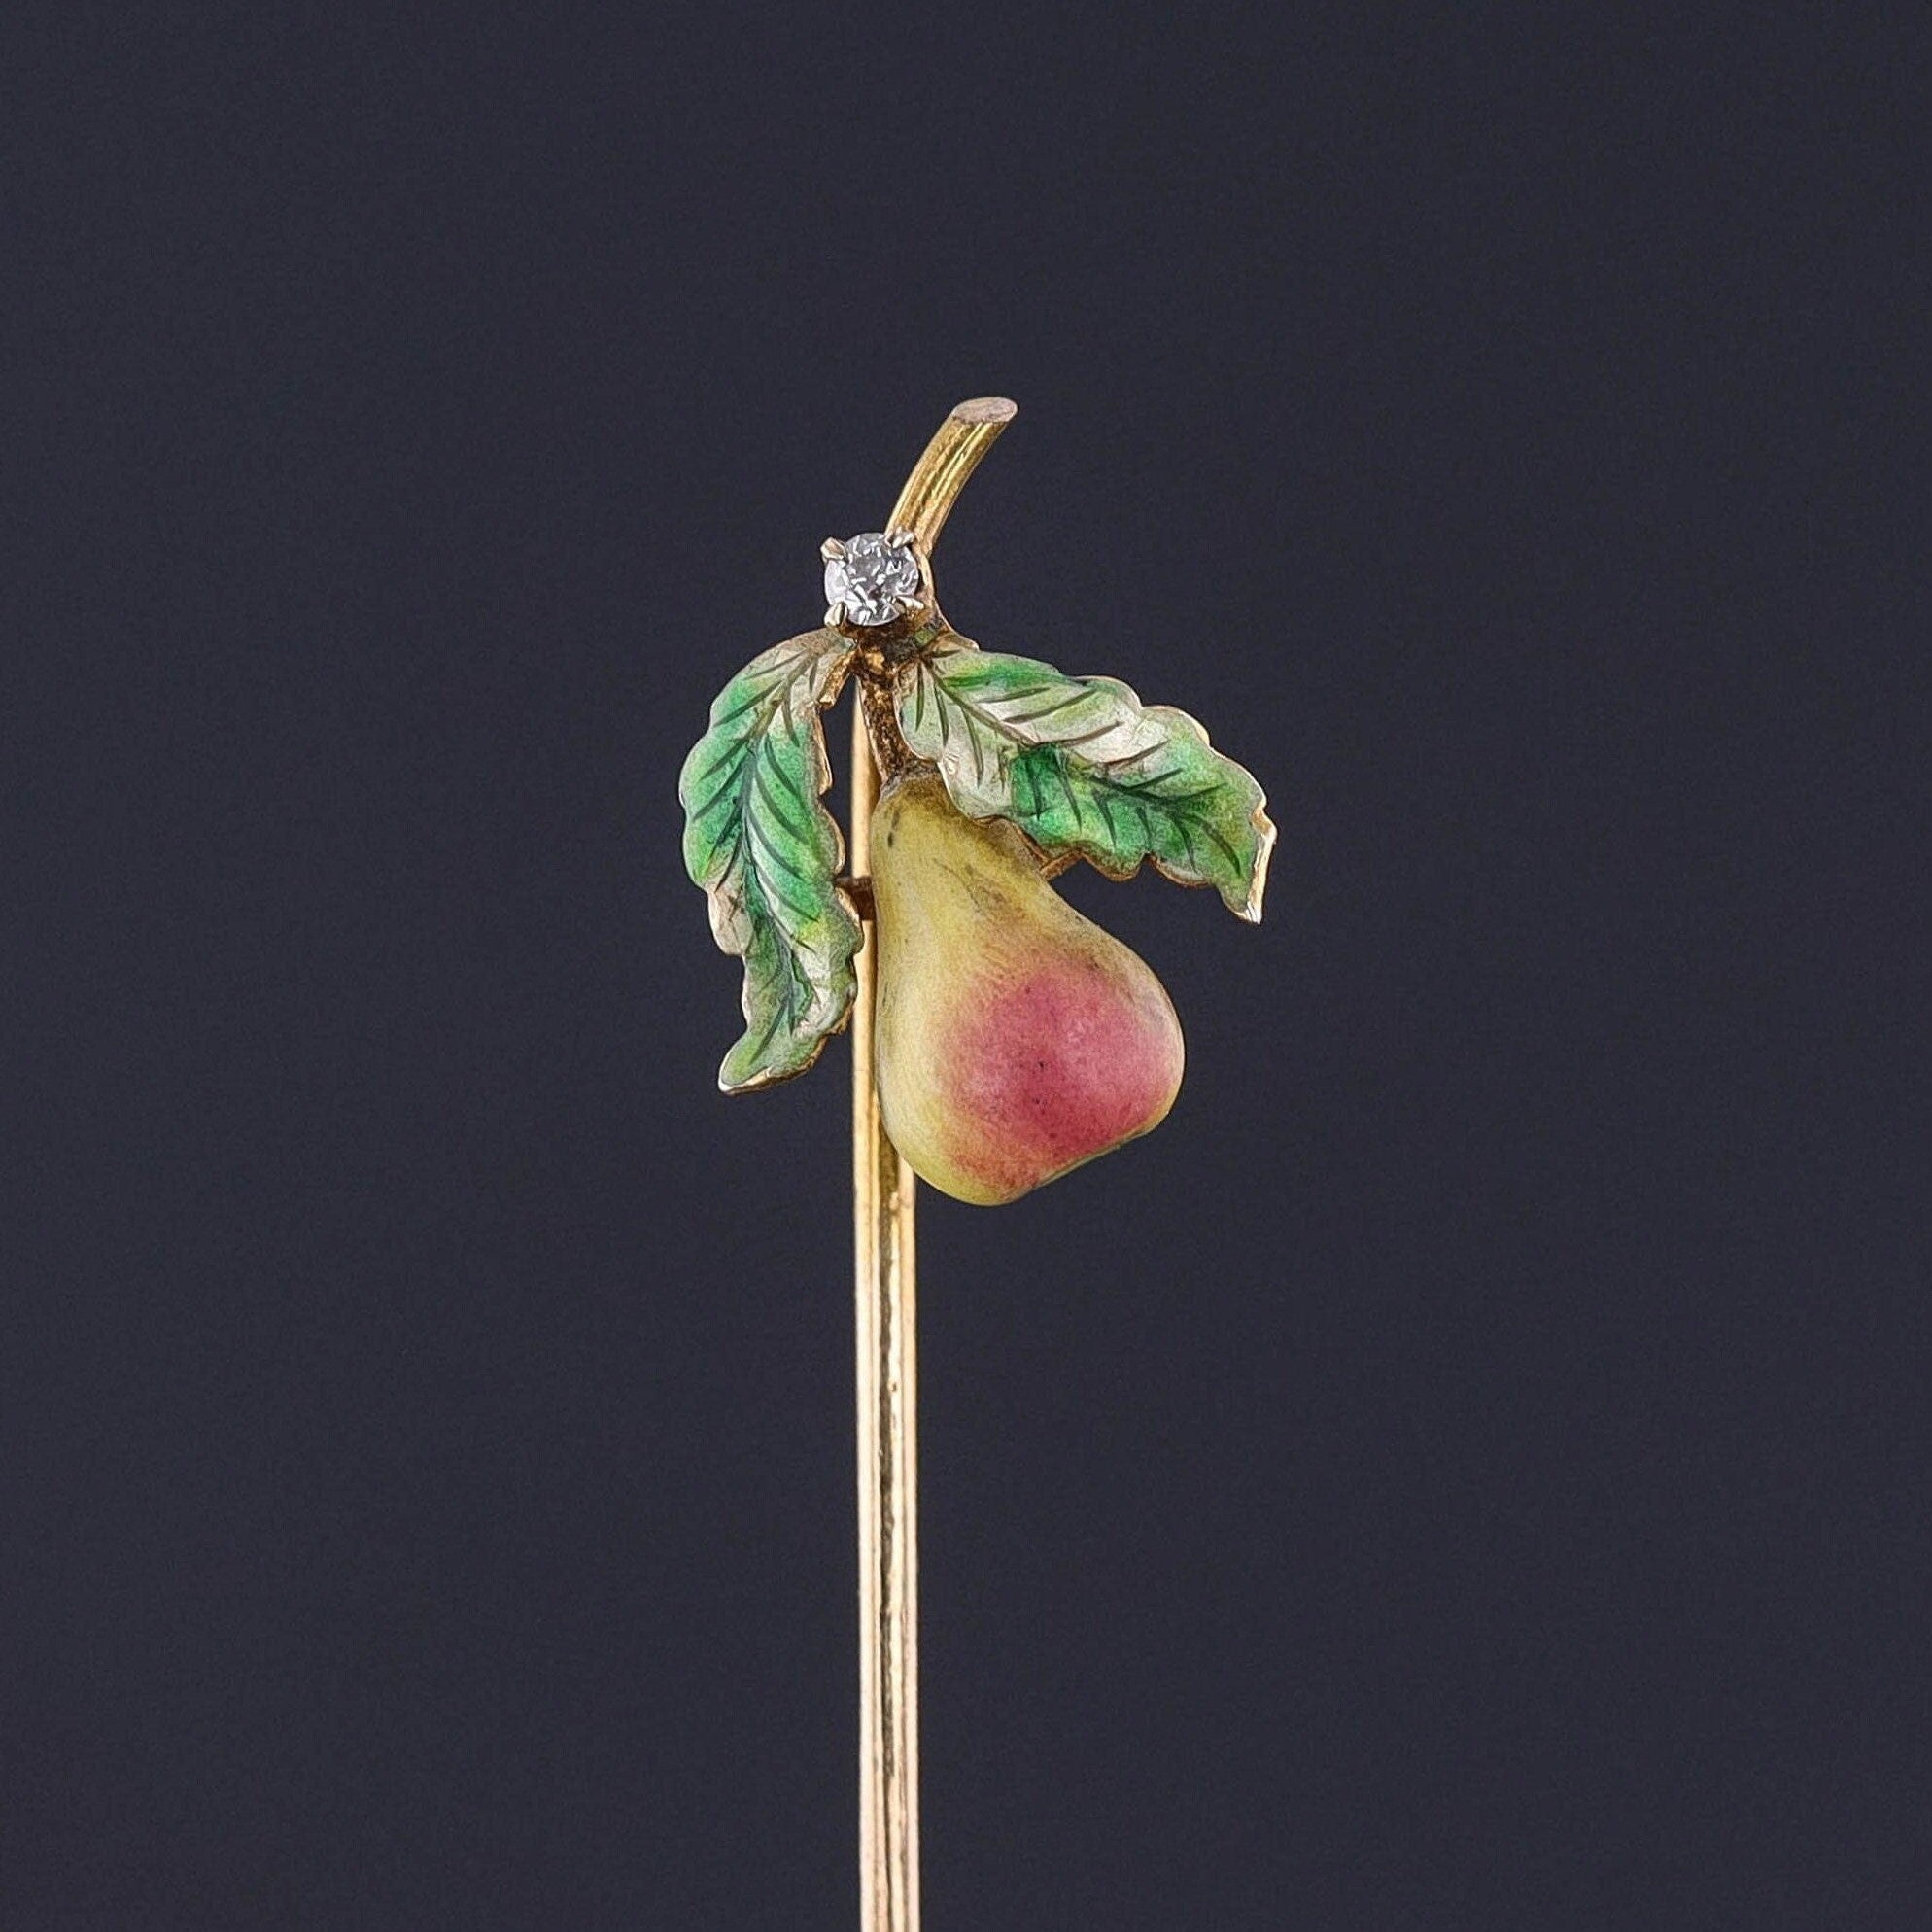 Antique Pear Stickpin: A vibrant antique pear stickpin (circa 1910) adorned with enamel and a sparkling diamond accent. The pin head measures 0.6 inches by 0.5 inches wide with the entire pin length measuring 2.3 inches long.